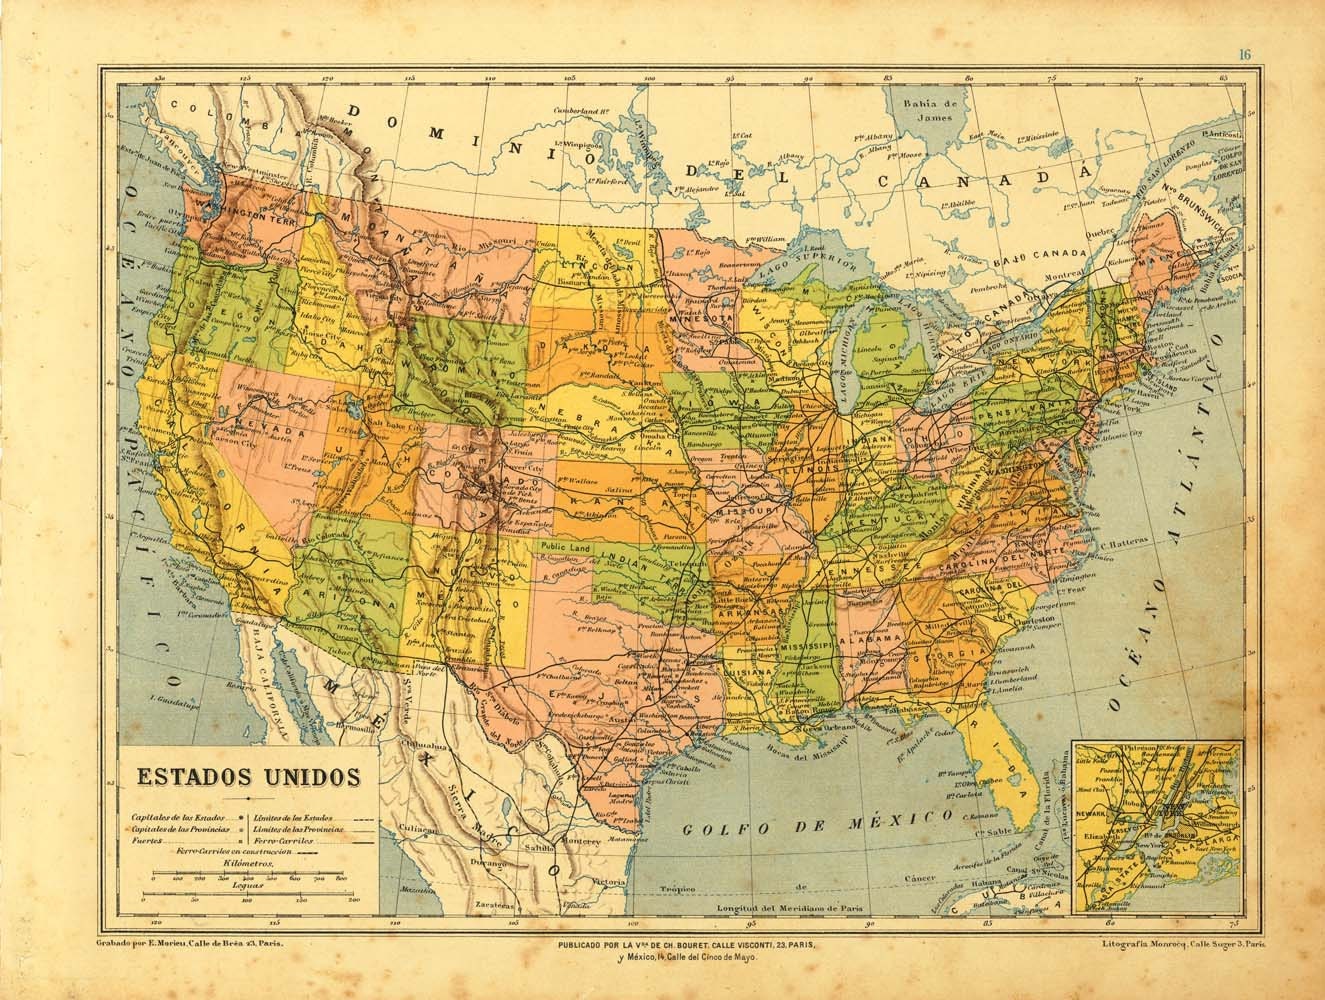 1899 United States Map Political Division Colorful